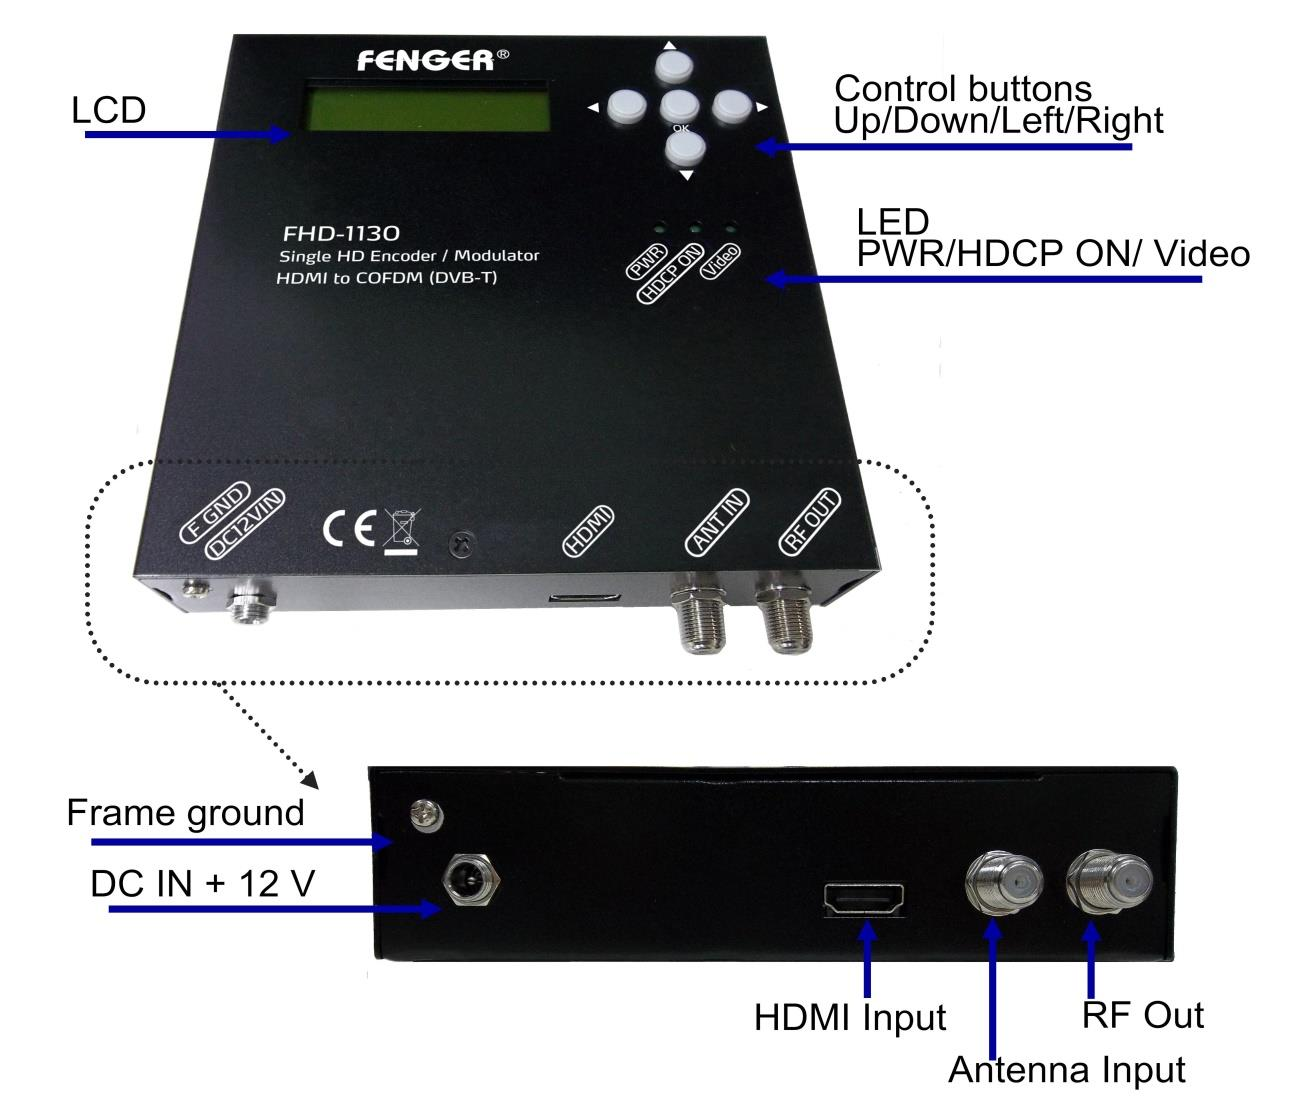 INTRODUCTION General Description Main Features FENGER s FHD-1130 is a High Definition DVB-T modulator with single HDMI input which provides COFDM RF signal output in frequenc range 100 MHz to 860 MHz.